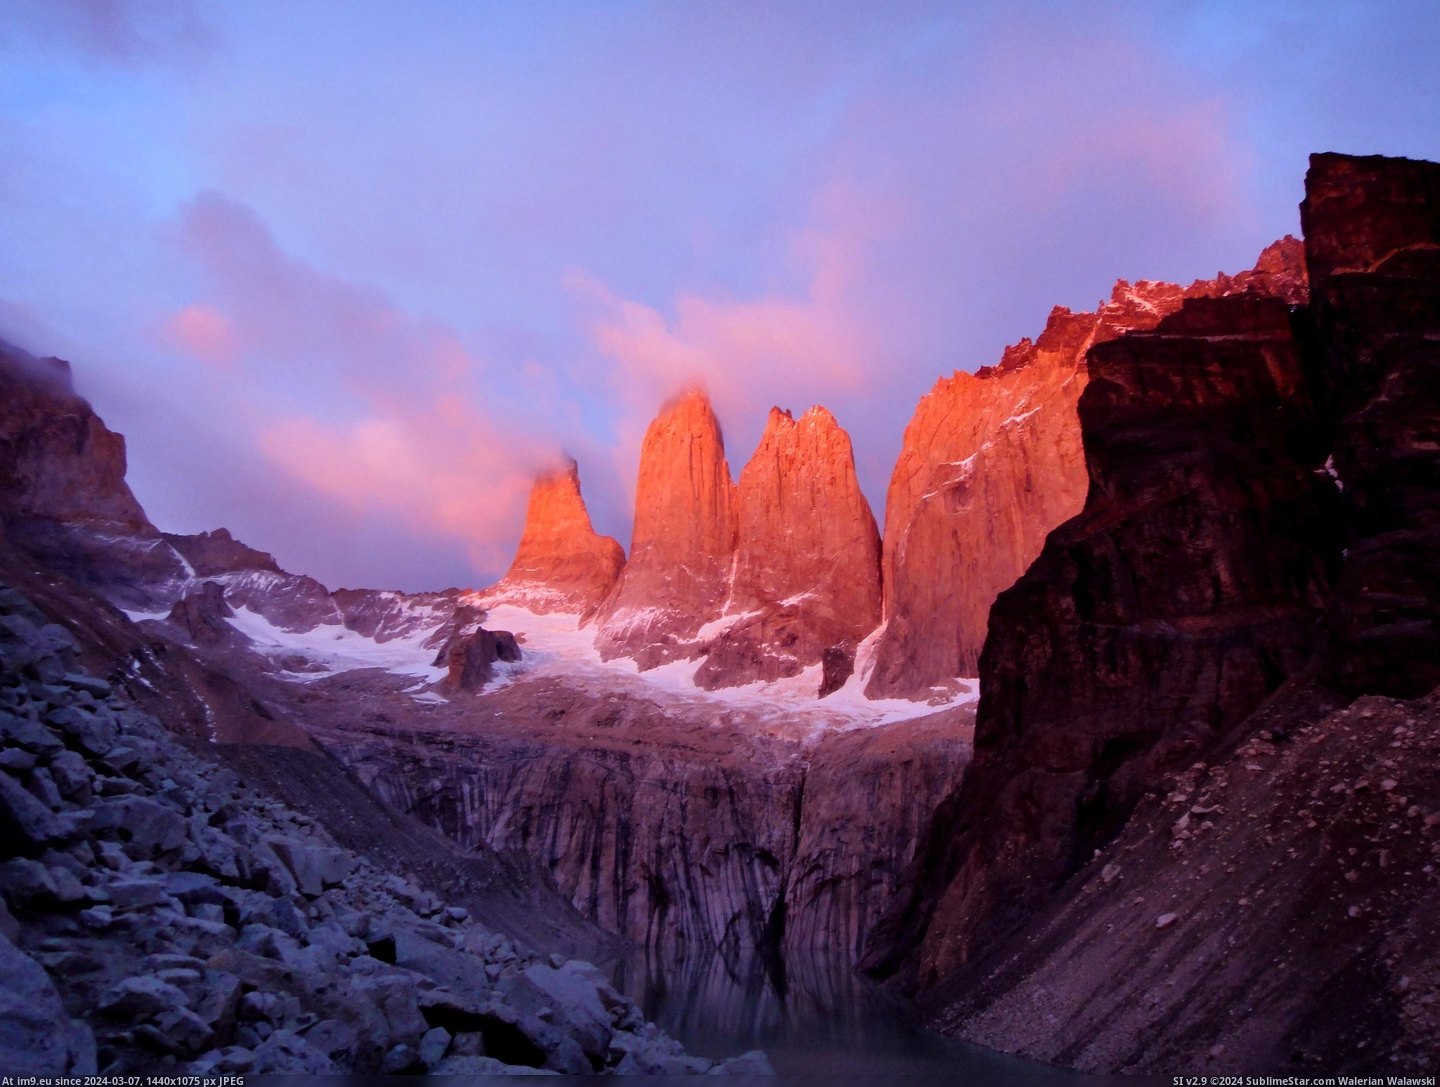 #Did #Place #Point #Sunrise #Patagonia #Torres #Paine #Justic #Shoot #Famous #Del #Hitting [Earthporn] Sunrise hitting the famous Torres del Paine in Patagonia. Not sure my little point & shoot did this place justic Pic. (Bild von album My r/EARTHPORN favs))